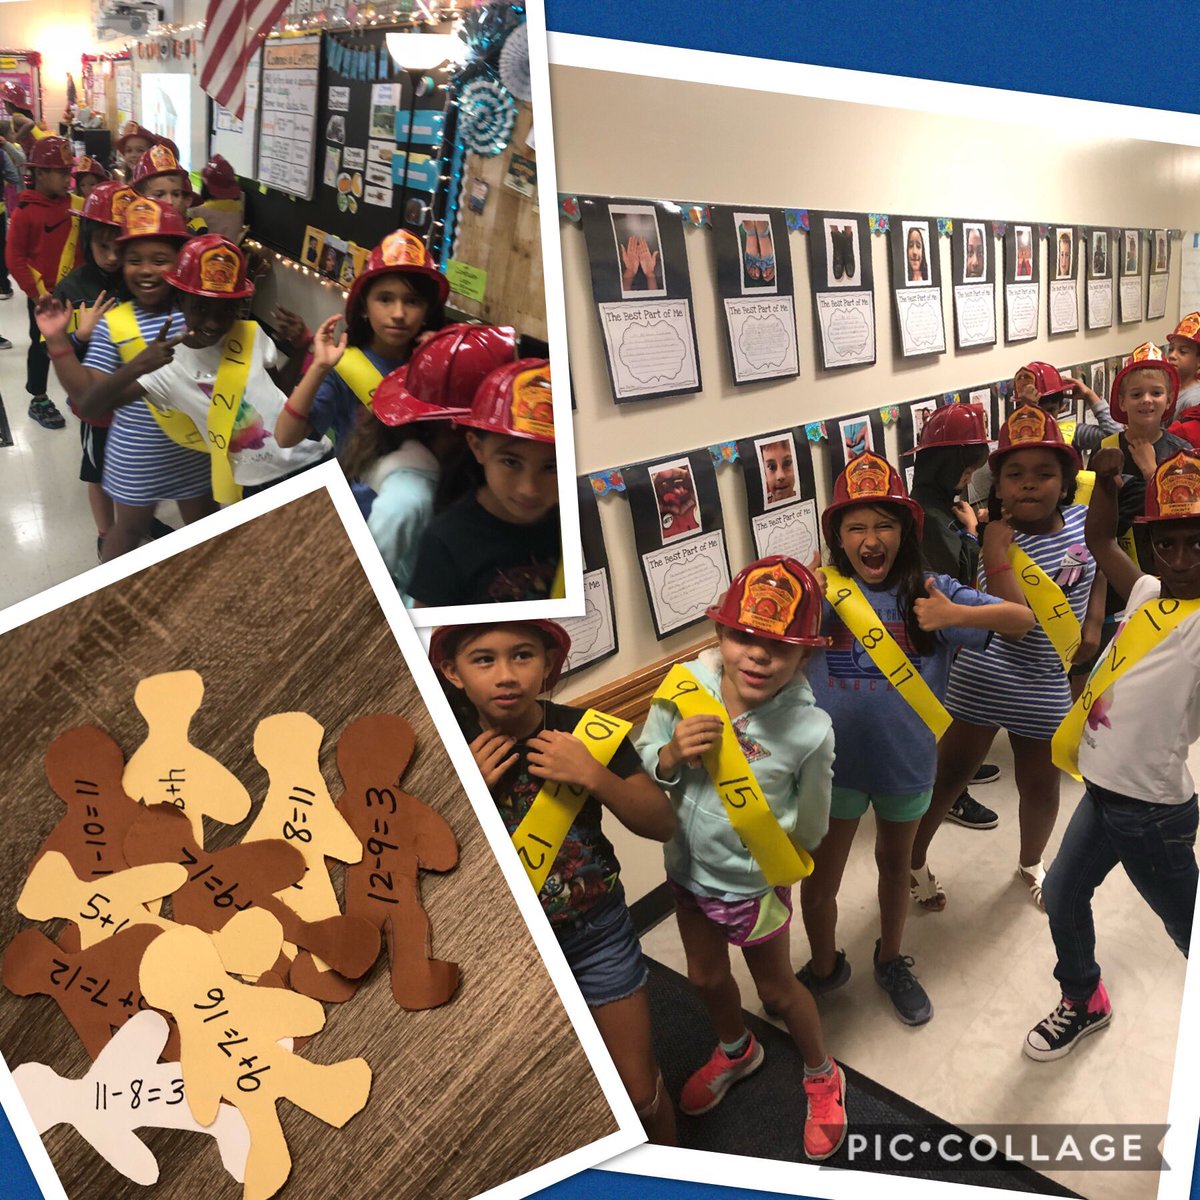 We had to save our “fact” families today during math!!! Ss ran into the fire 🔥 to save the 4 members of their families.  It was hard work, but I’m happy to report that all family members are safe!!! 😃 #firesafetyweek #secondgrade #SBCEBobcats